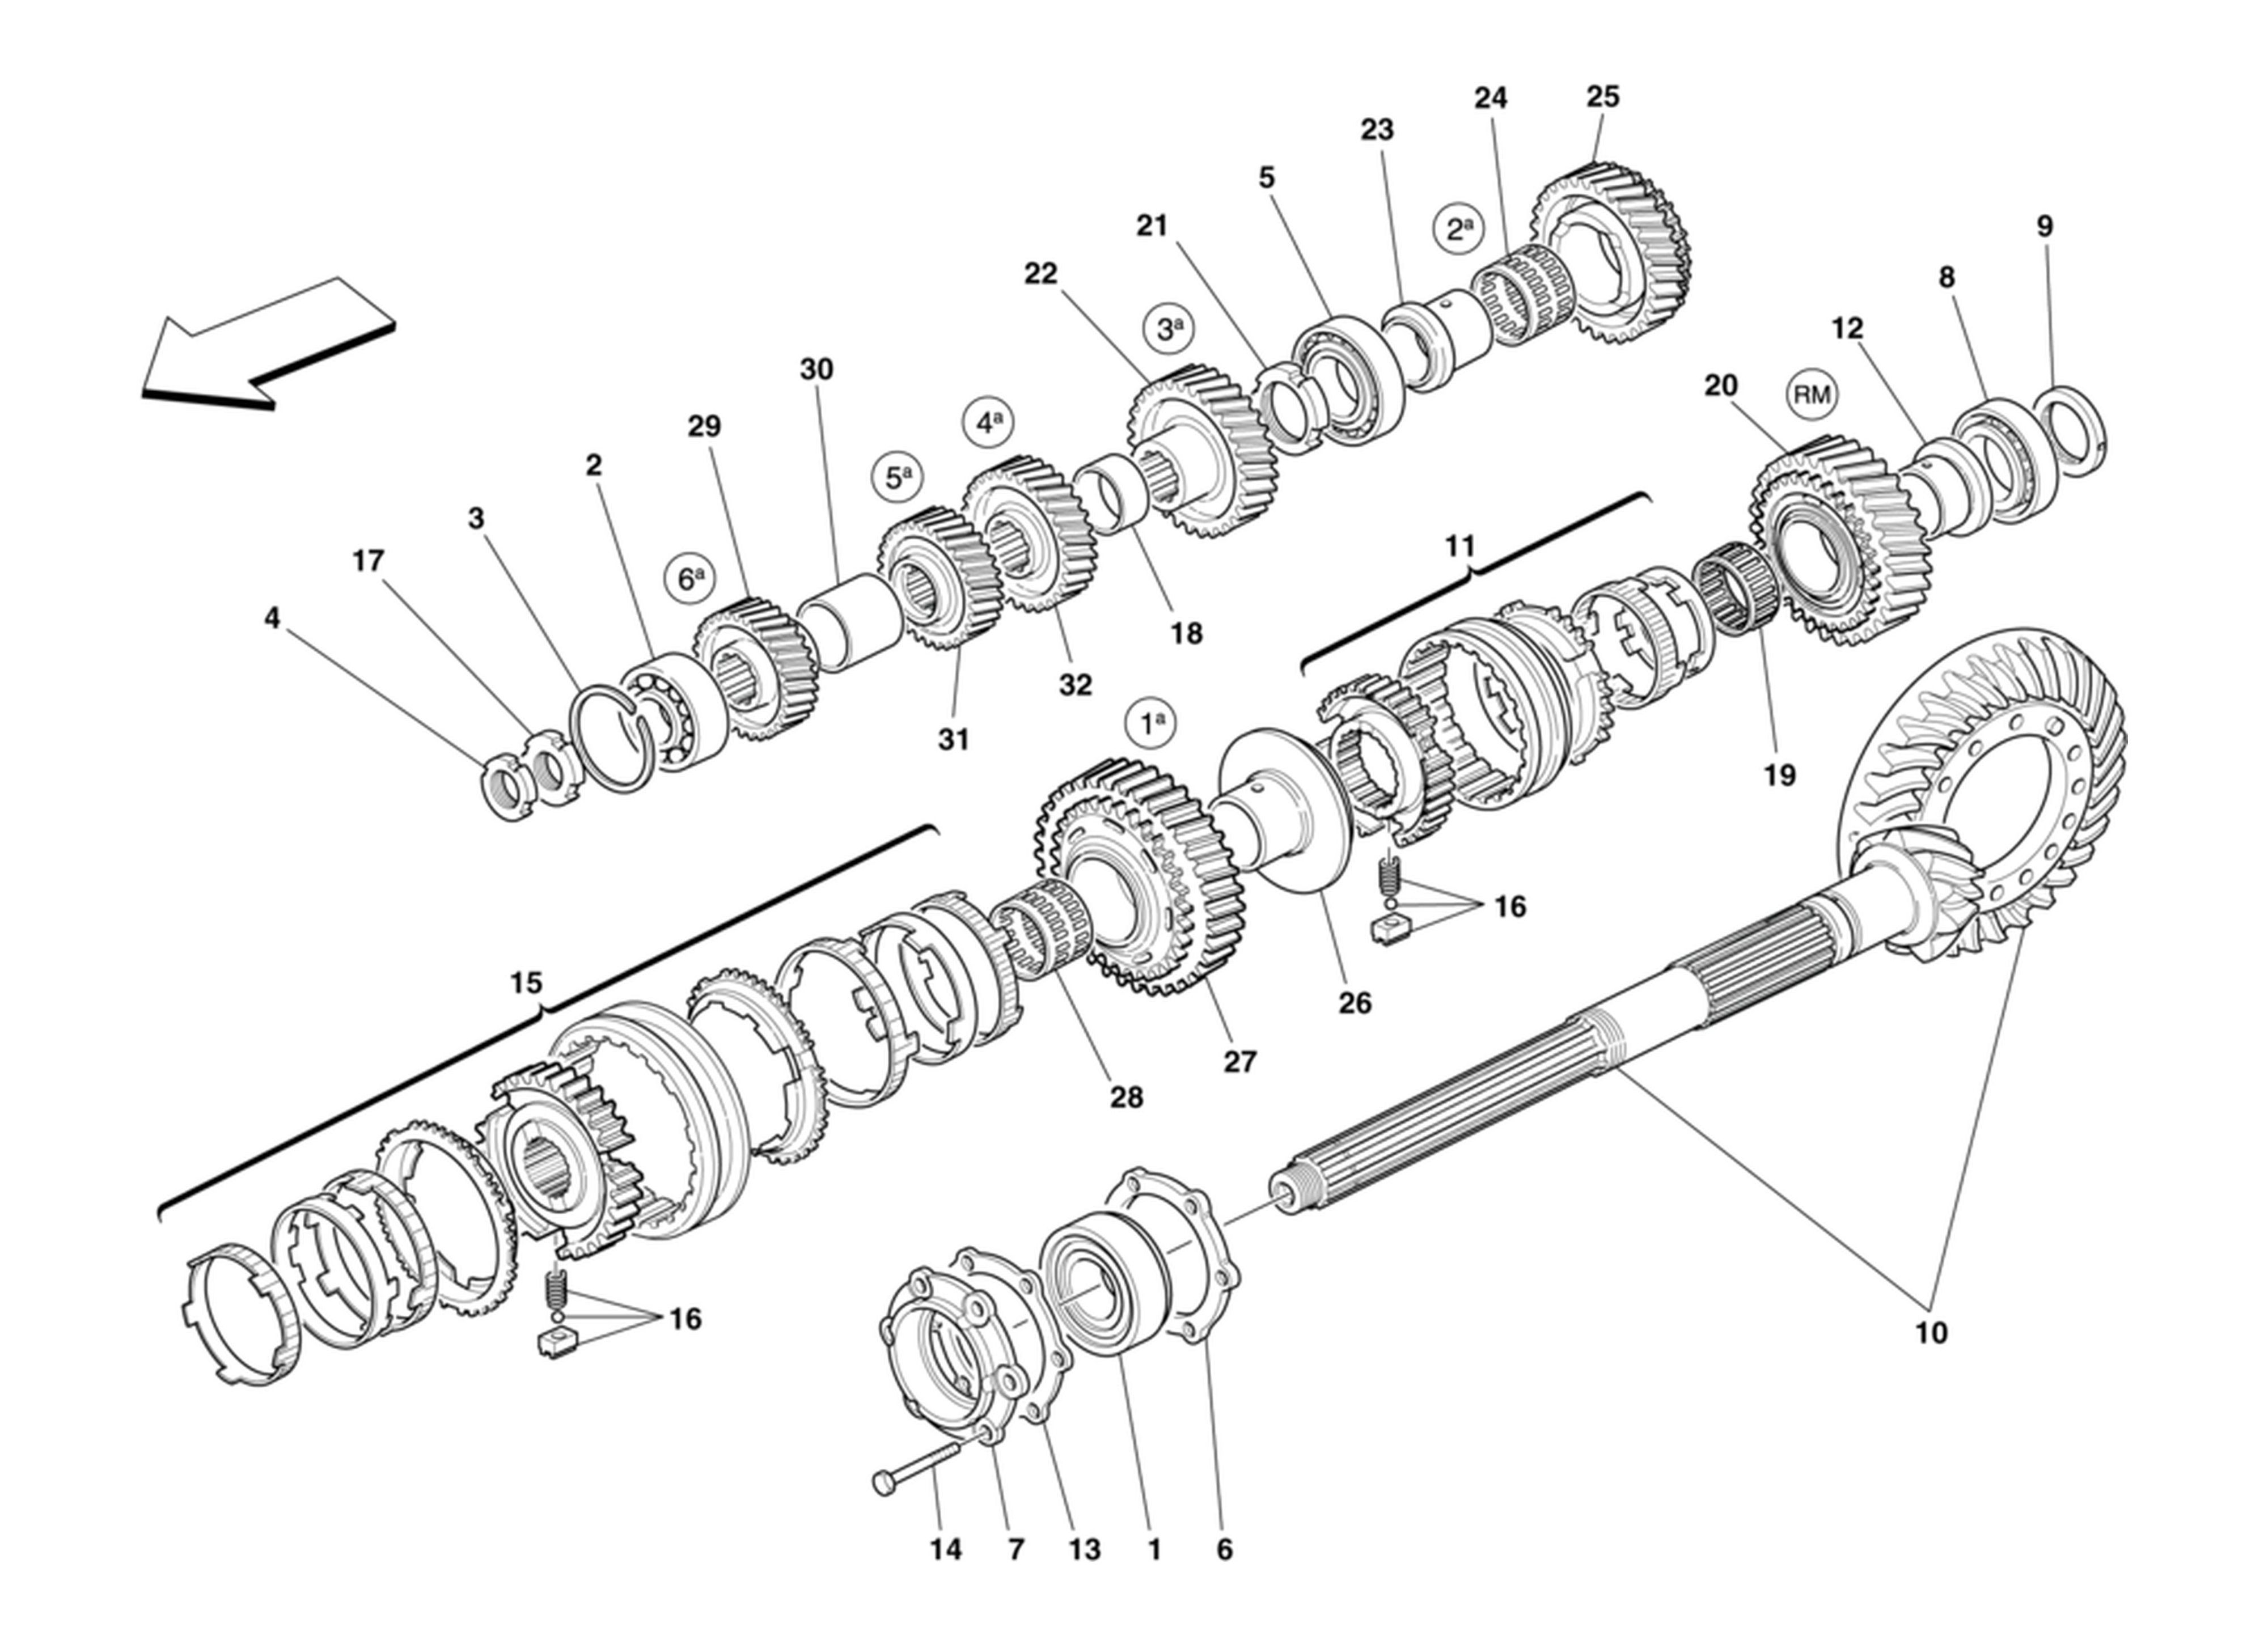 Schematic: Secondary Gearbox And Shaft Gears